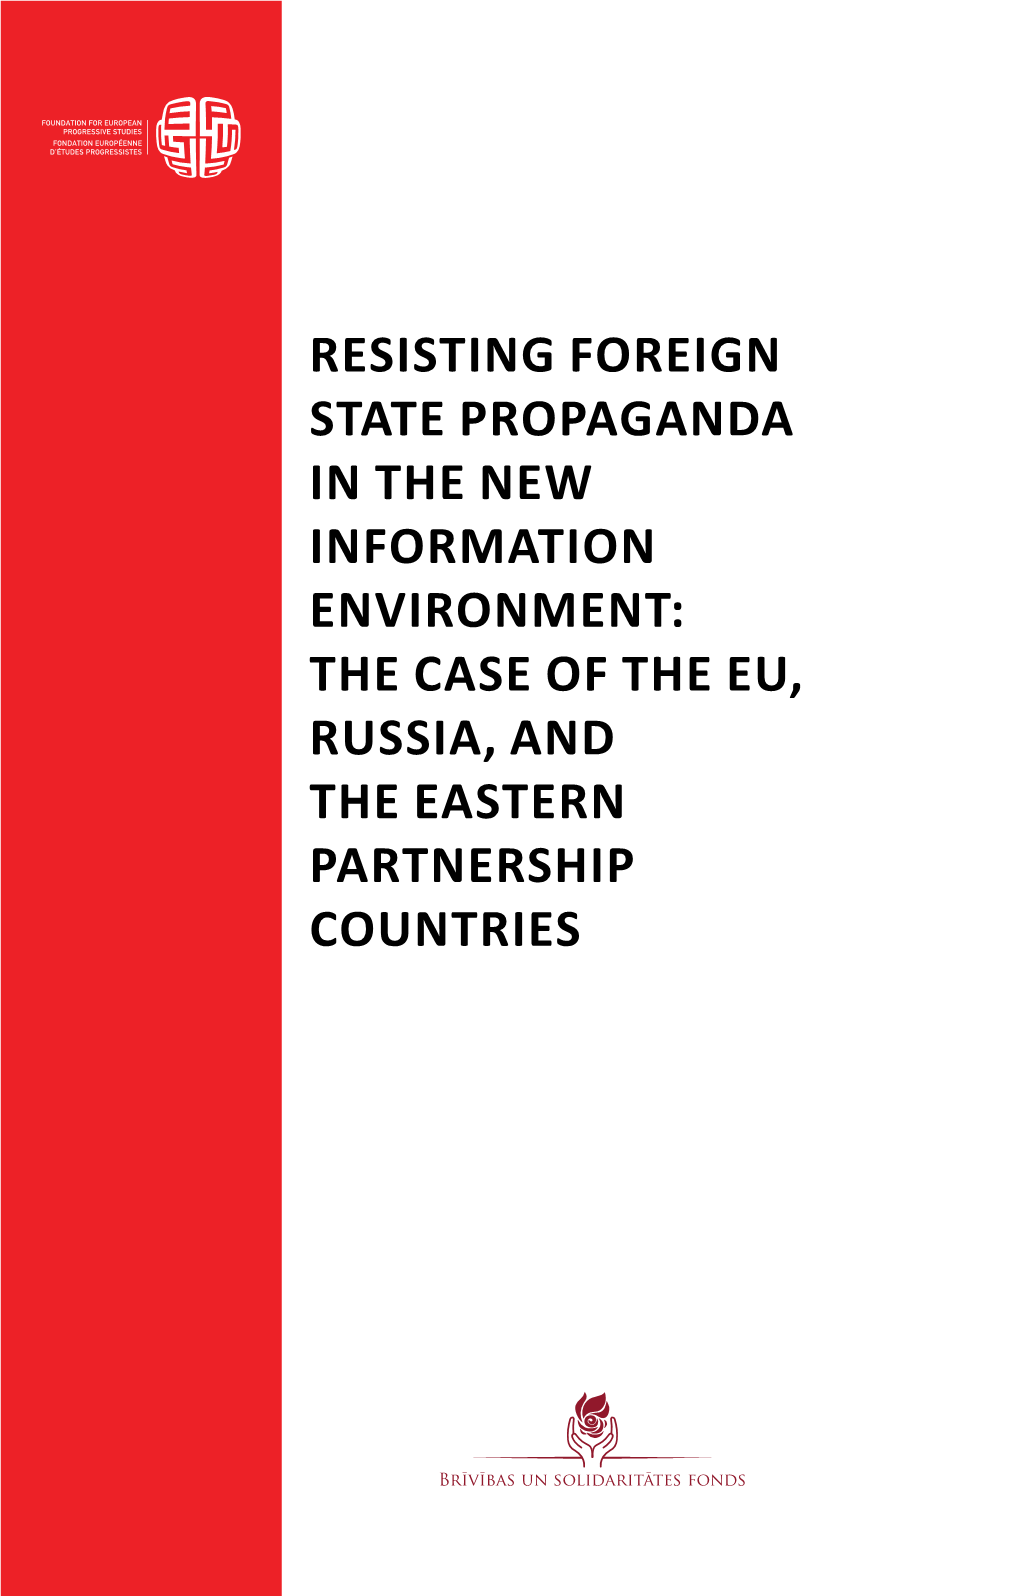 Resisting Foreign State Propaganda in the New Information Environment: the Case of the EU, Russia, and the Eastern Partnership Countries ISBN 978-9934-8536-9-2